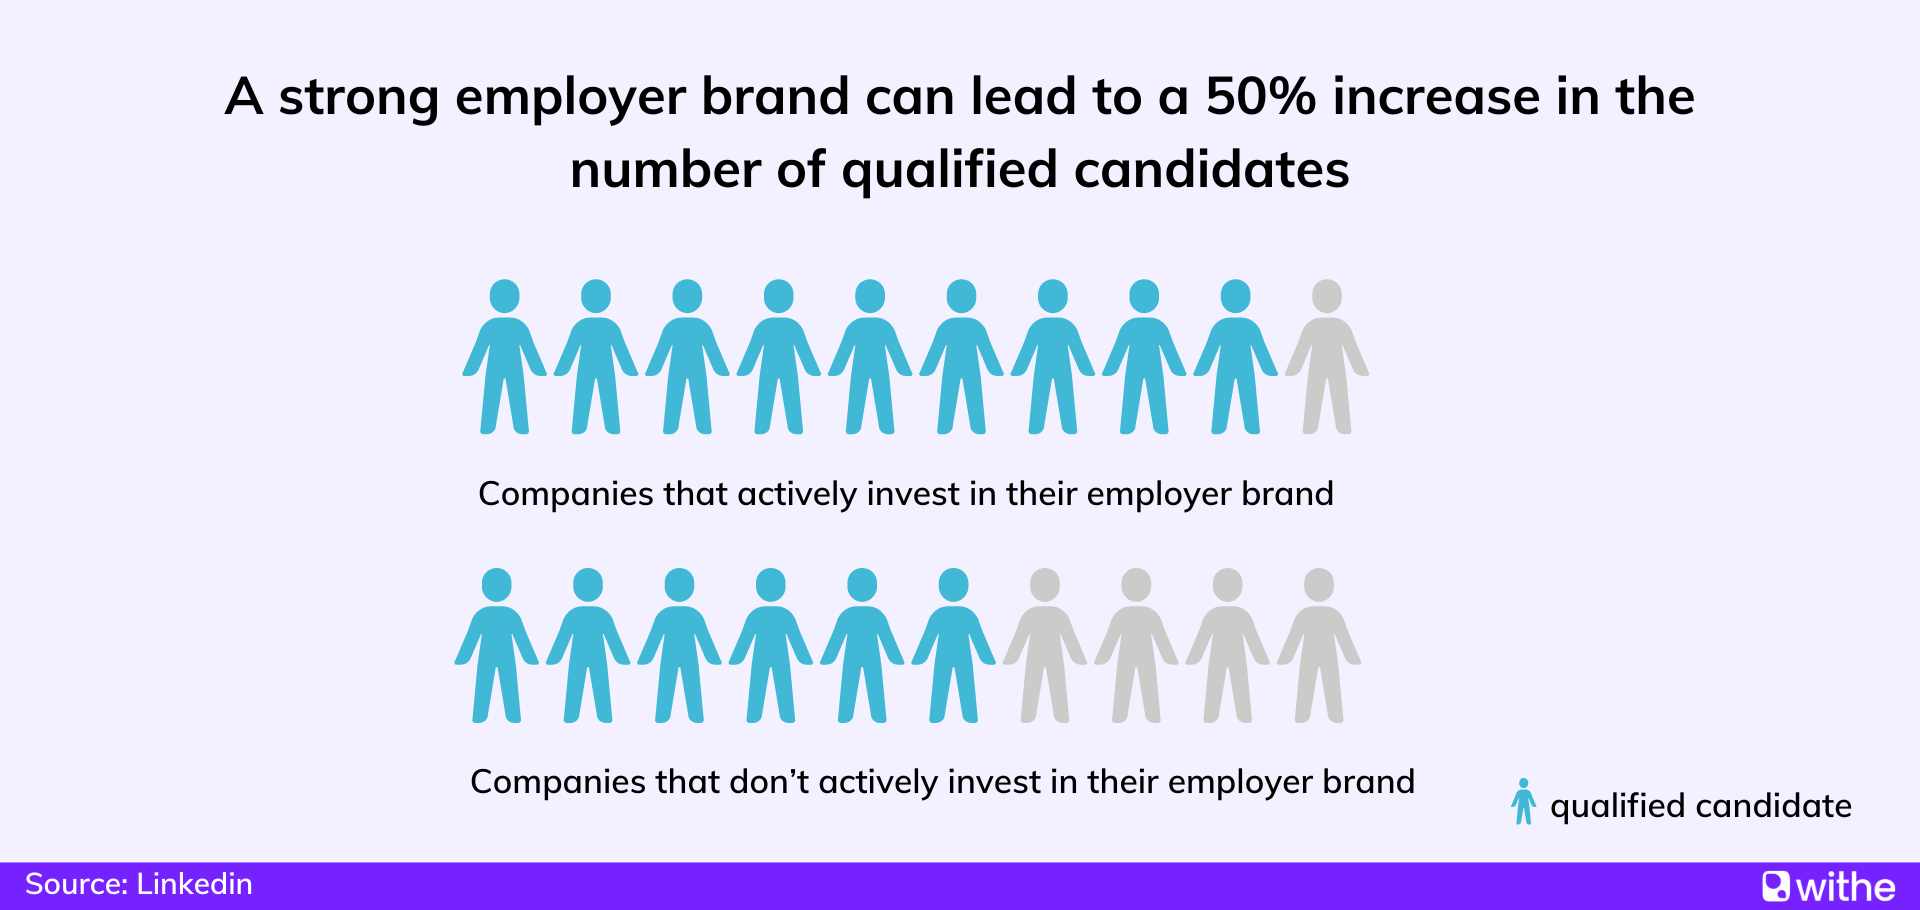 Employer brand statistics - A strong employer brand can lead to a 50% increase in the number of qualified candidates